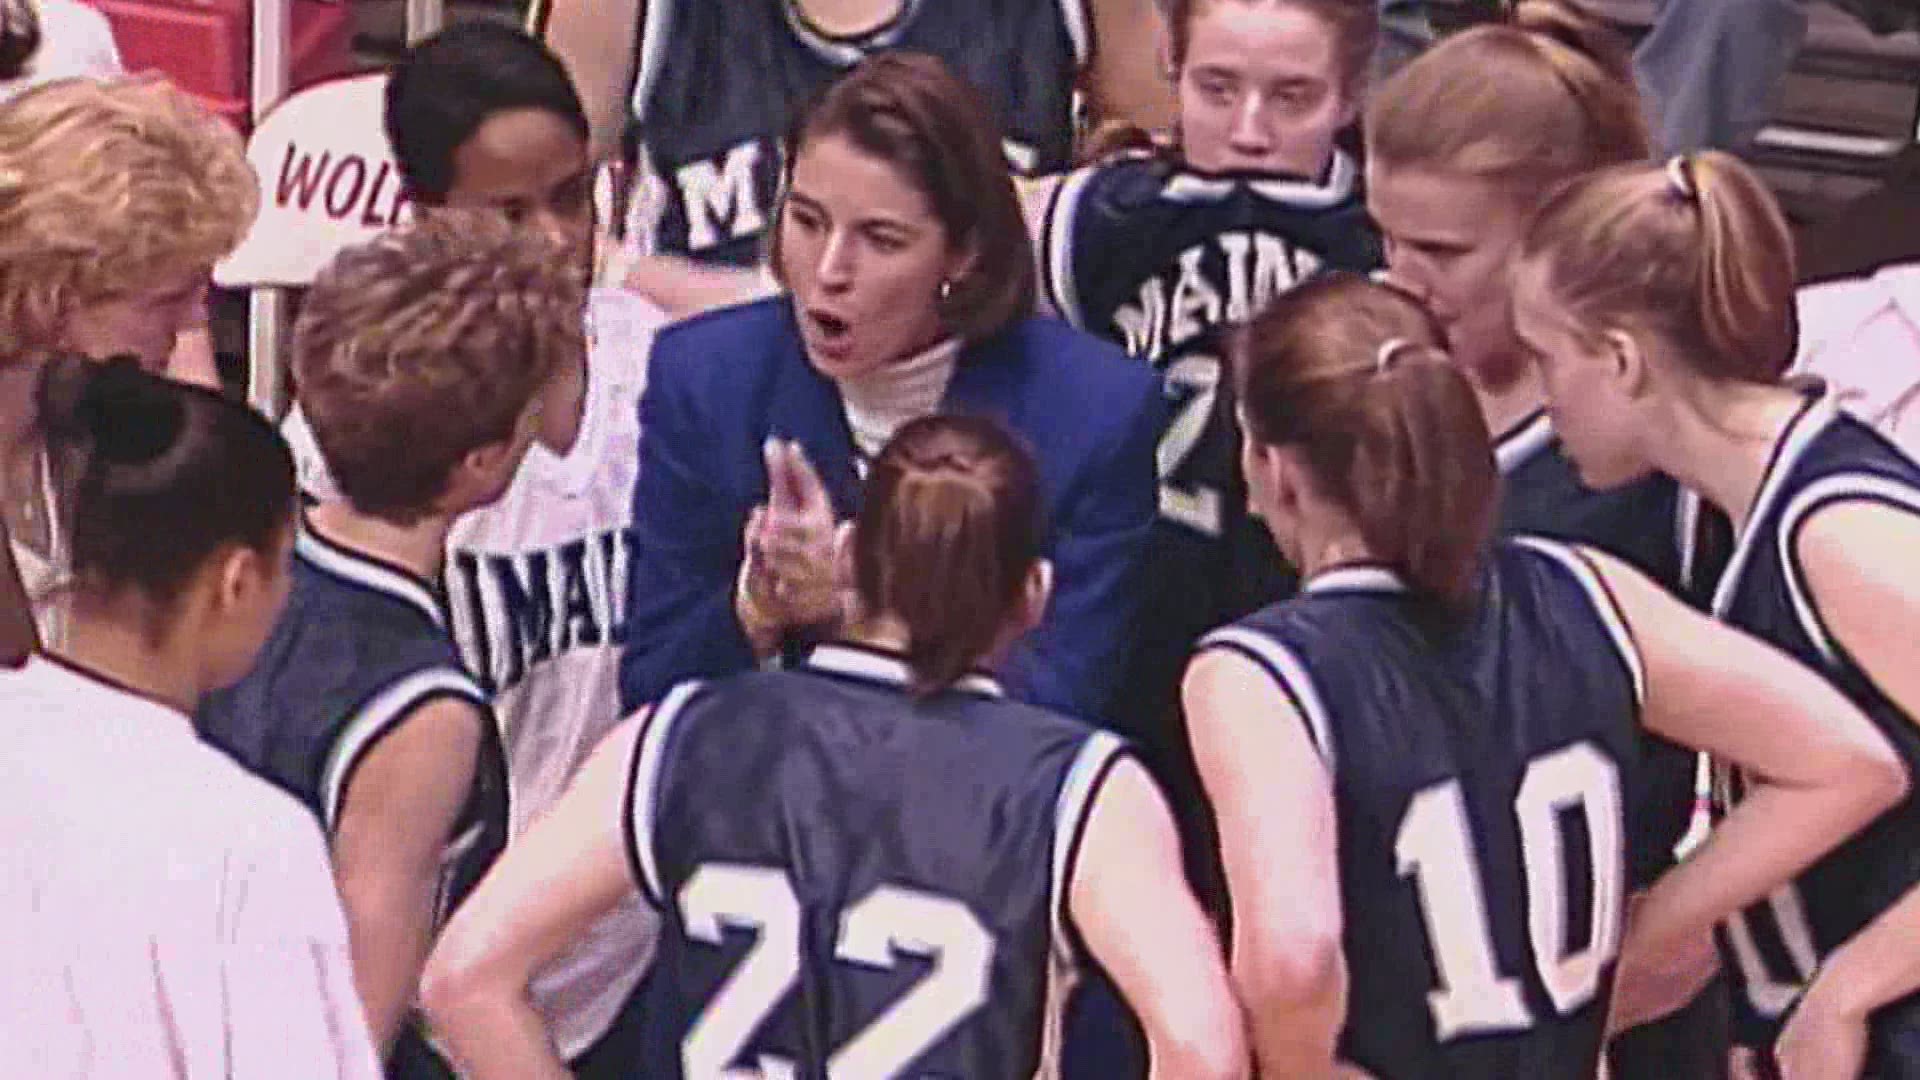 Joanne (Coach P) McCallie, coached basketball at UMaine, Duke, Michigan State, and Auburn University. Now, she's sharing her struggle with mental illness.